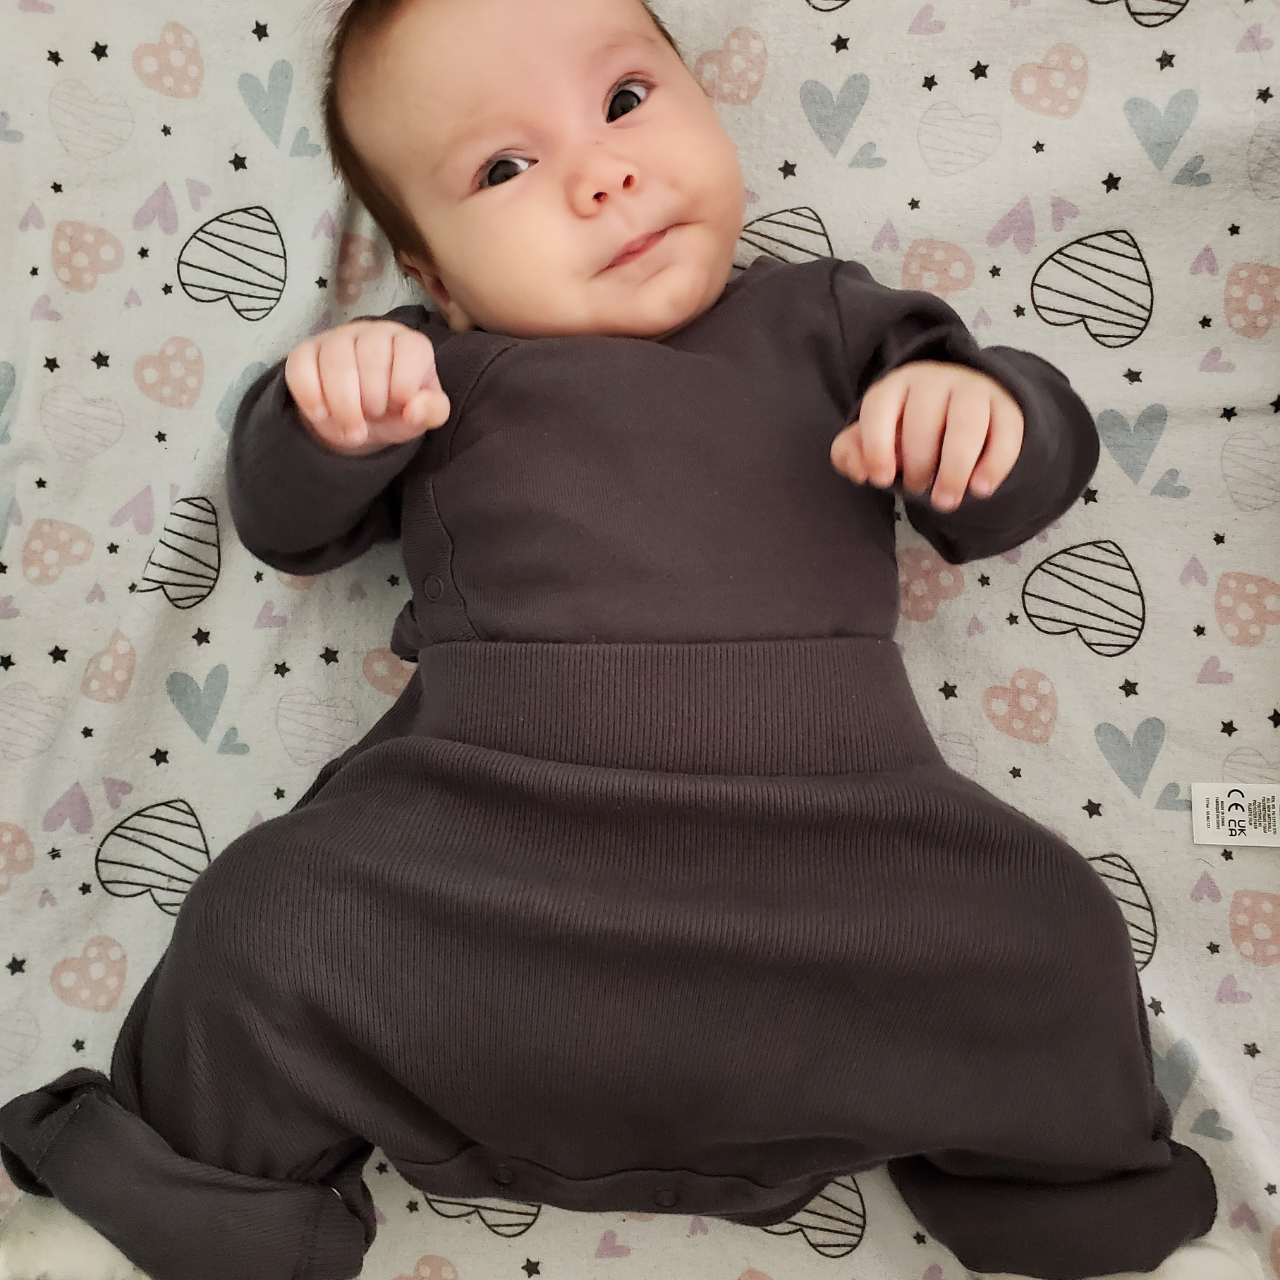 Author Laura's daughter in the pavlik harness under a special onesie made specifically for babies with hip dysplasia 